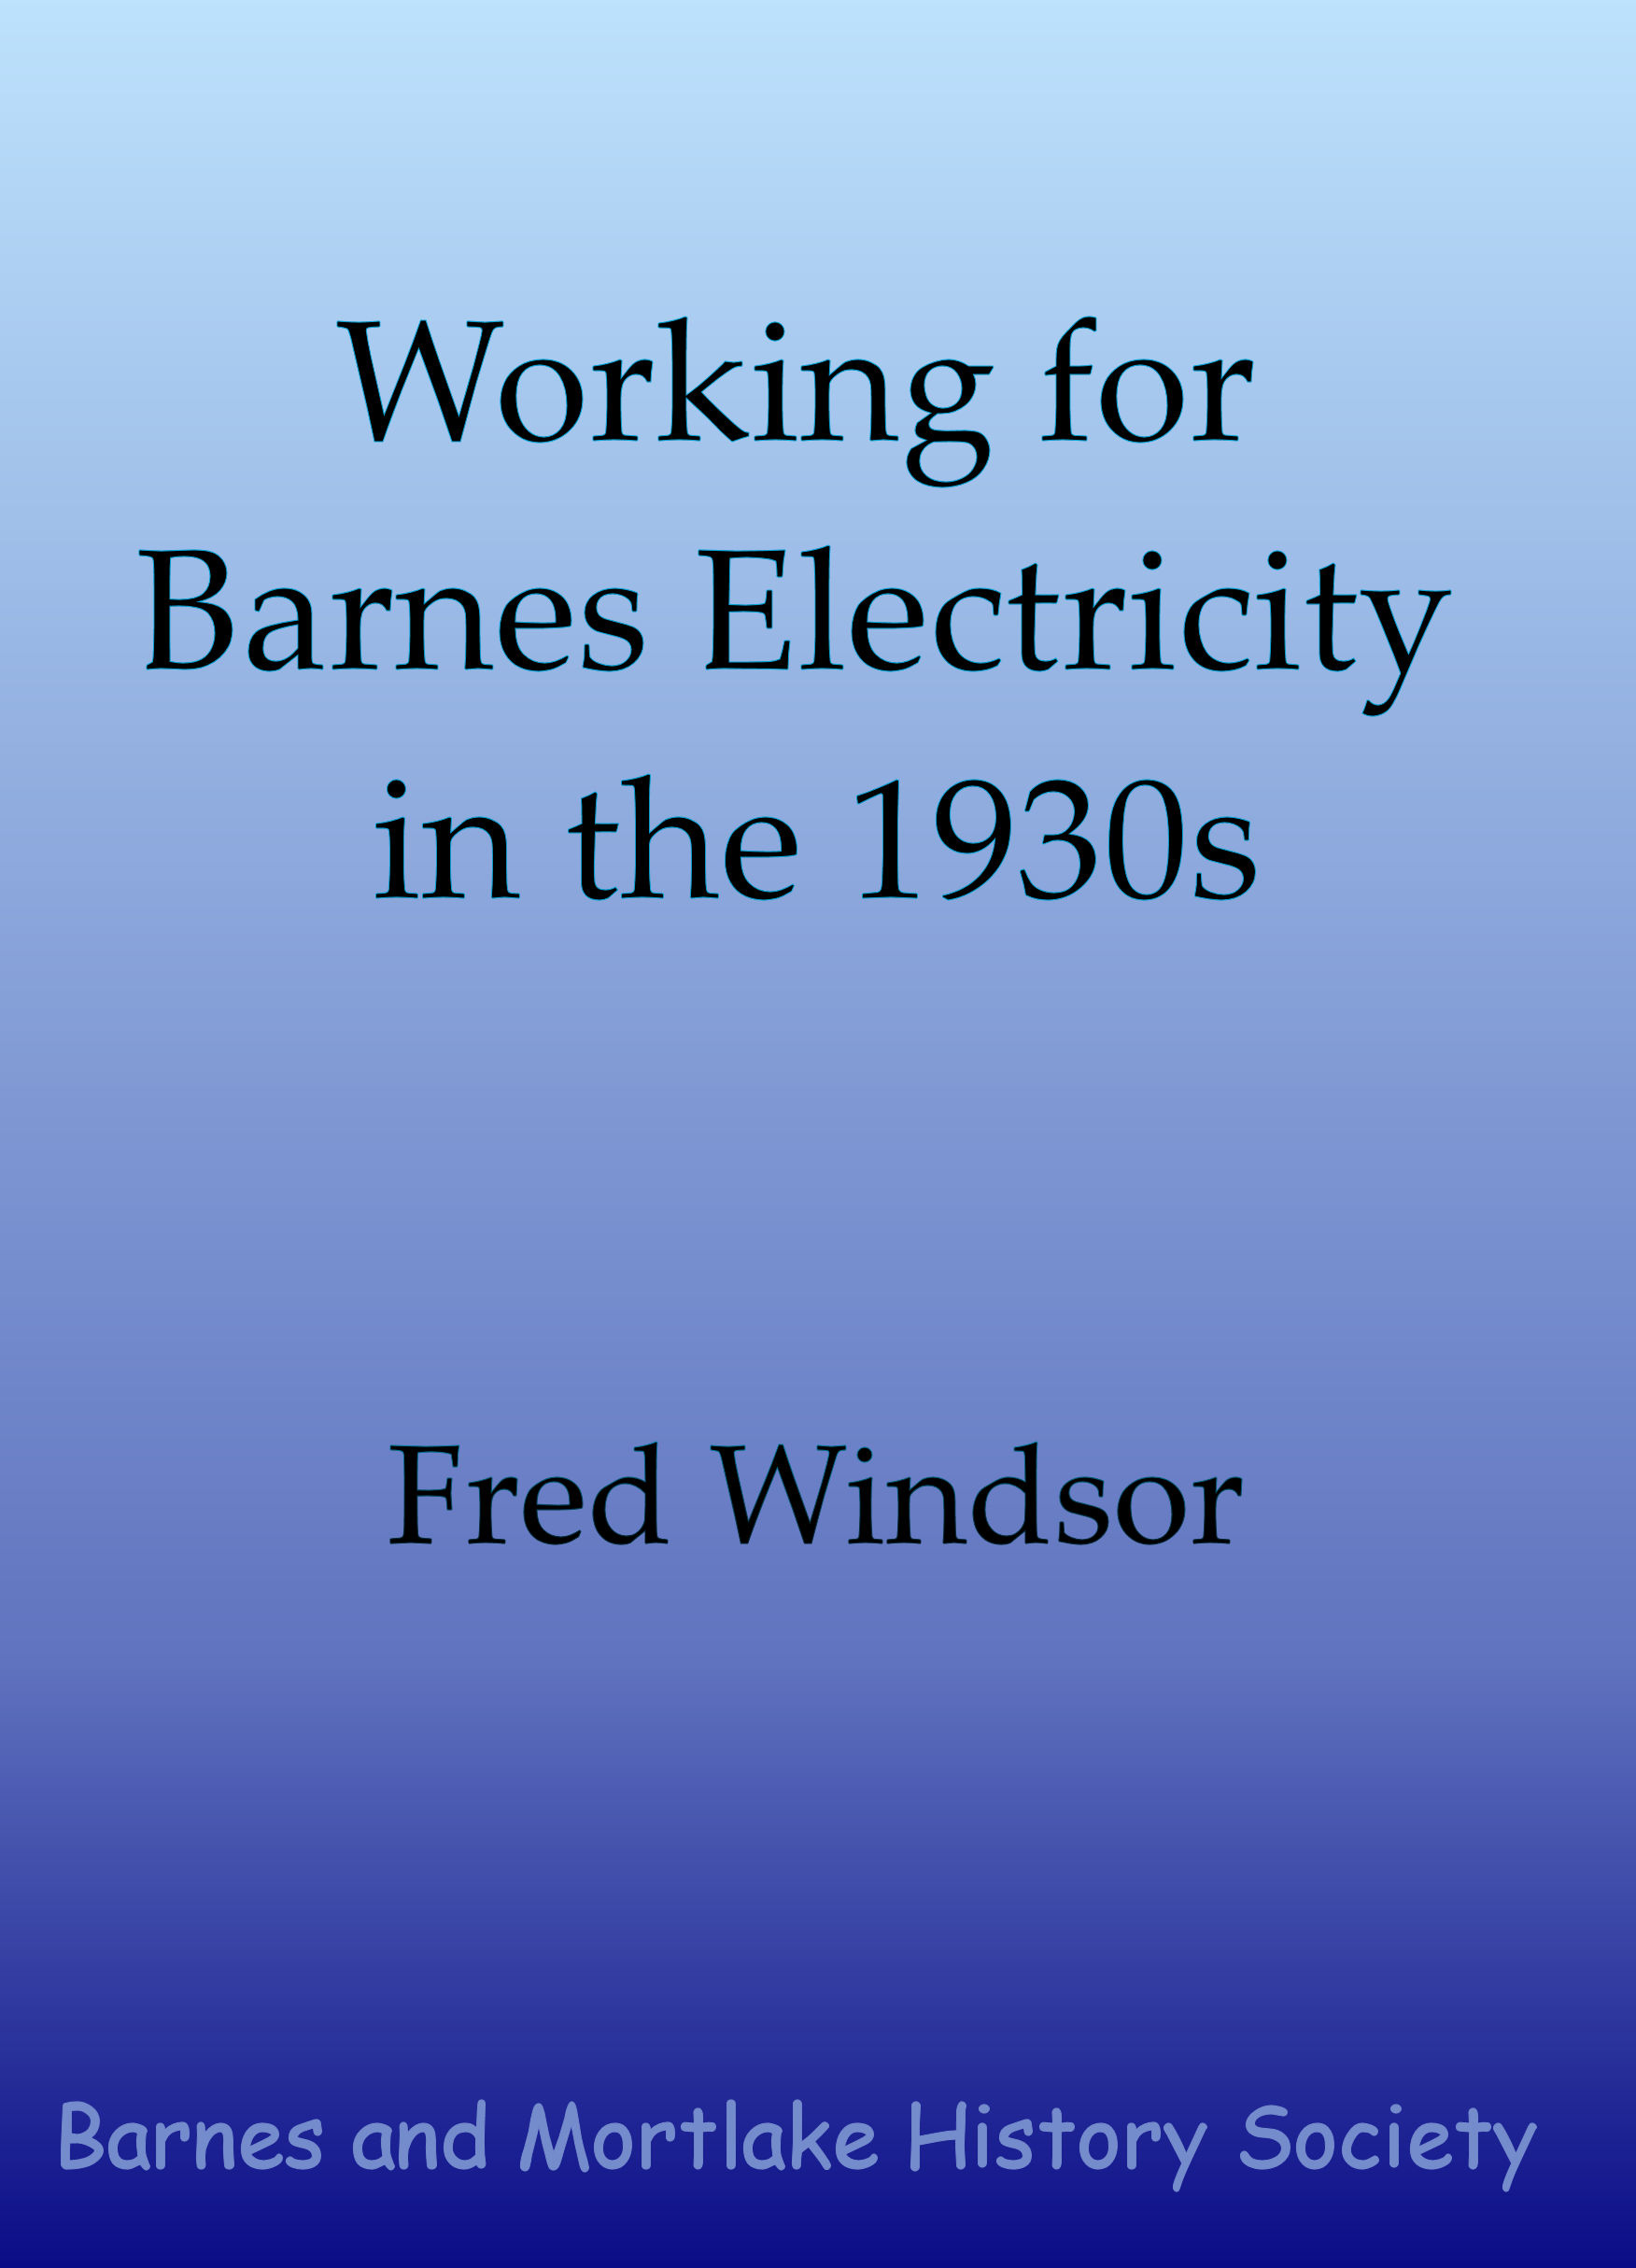 Working for Barnes Electricity in the 1930s